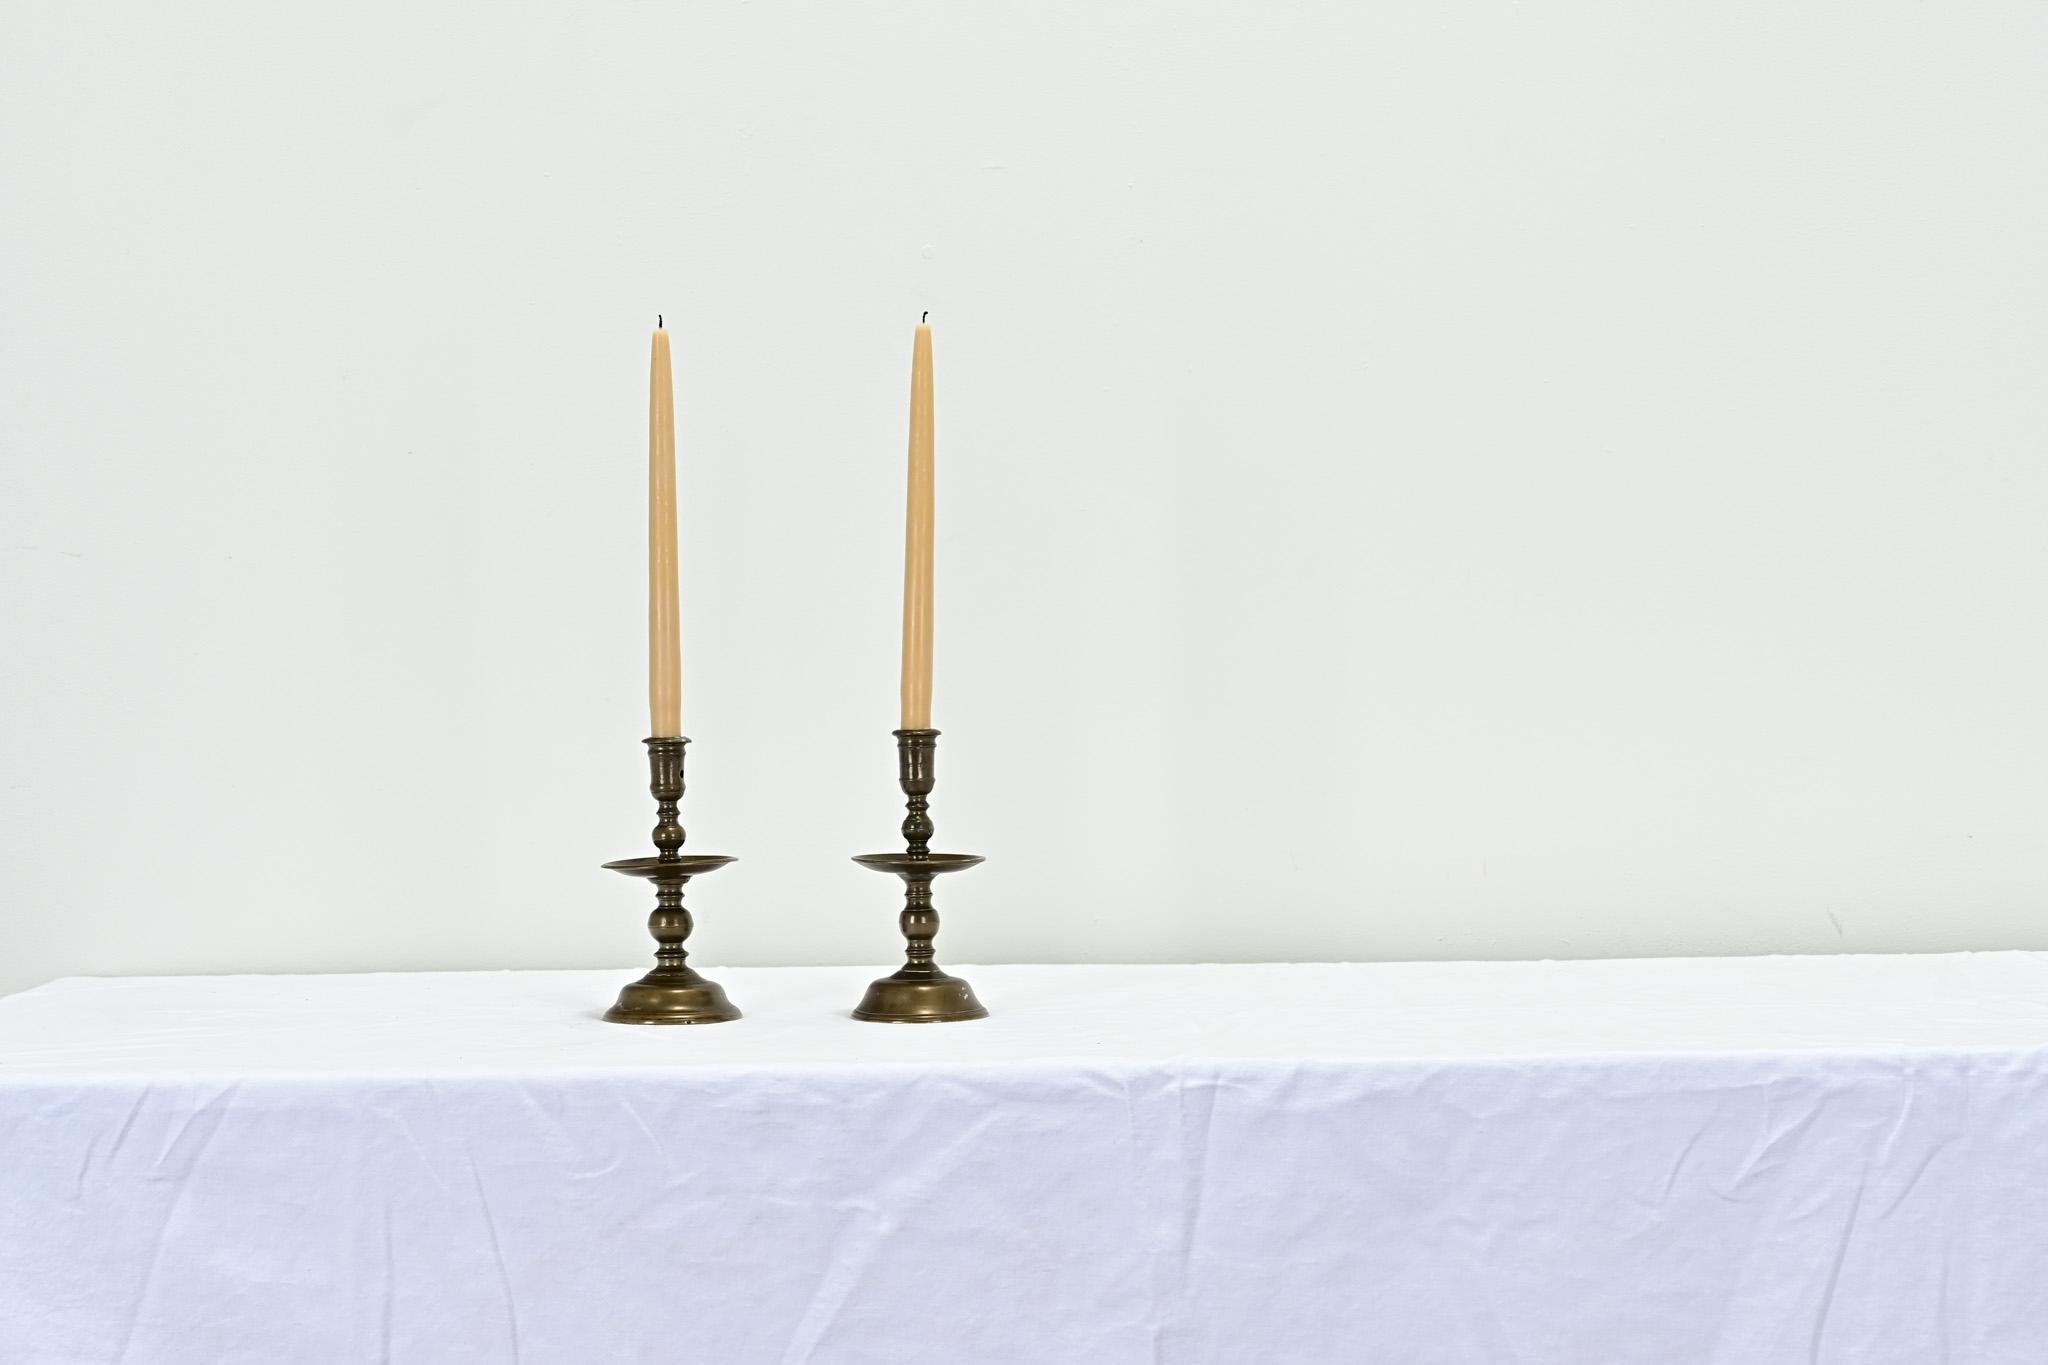 A pair of solid brass Flemish candlesticks from the 1600’s. This outstanding pair of candlesticks have stayed together for over 300 years. Be sure to view the detailed images to see the current condition. 